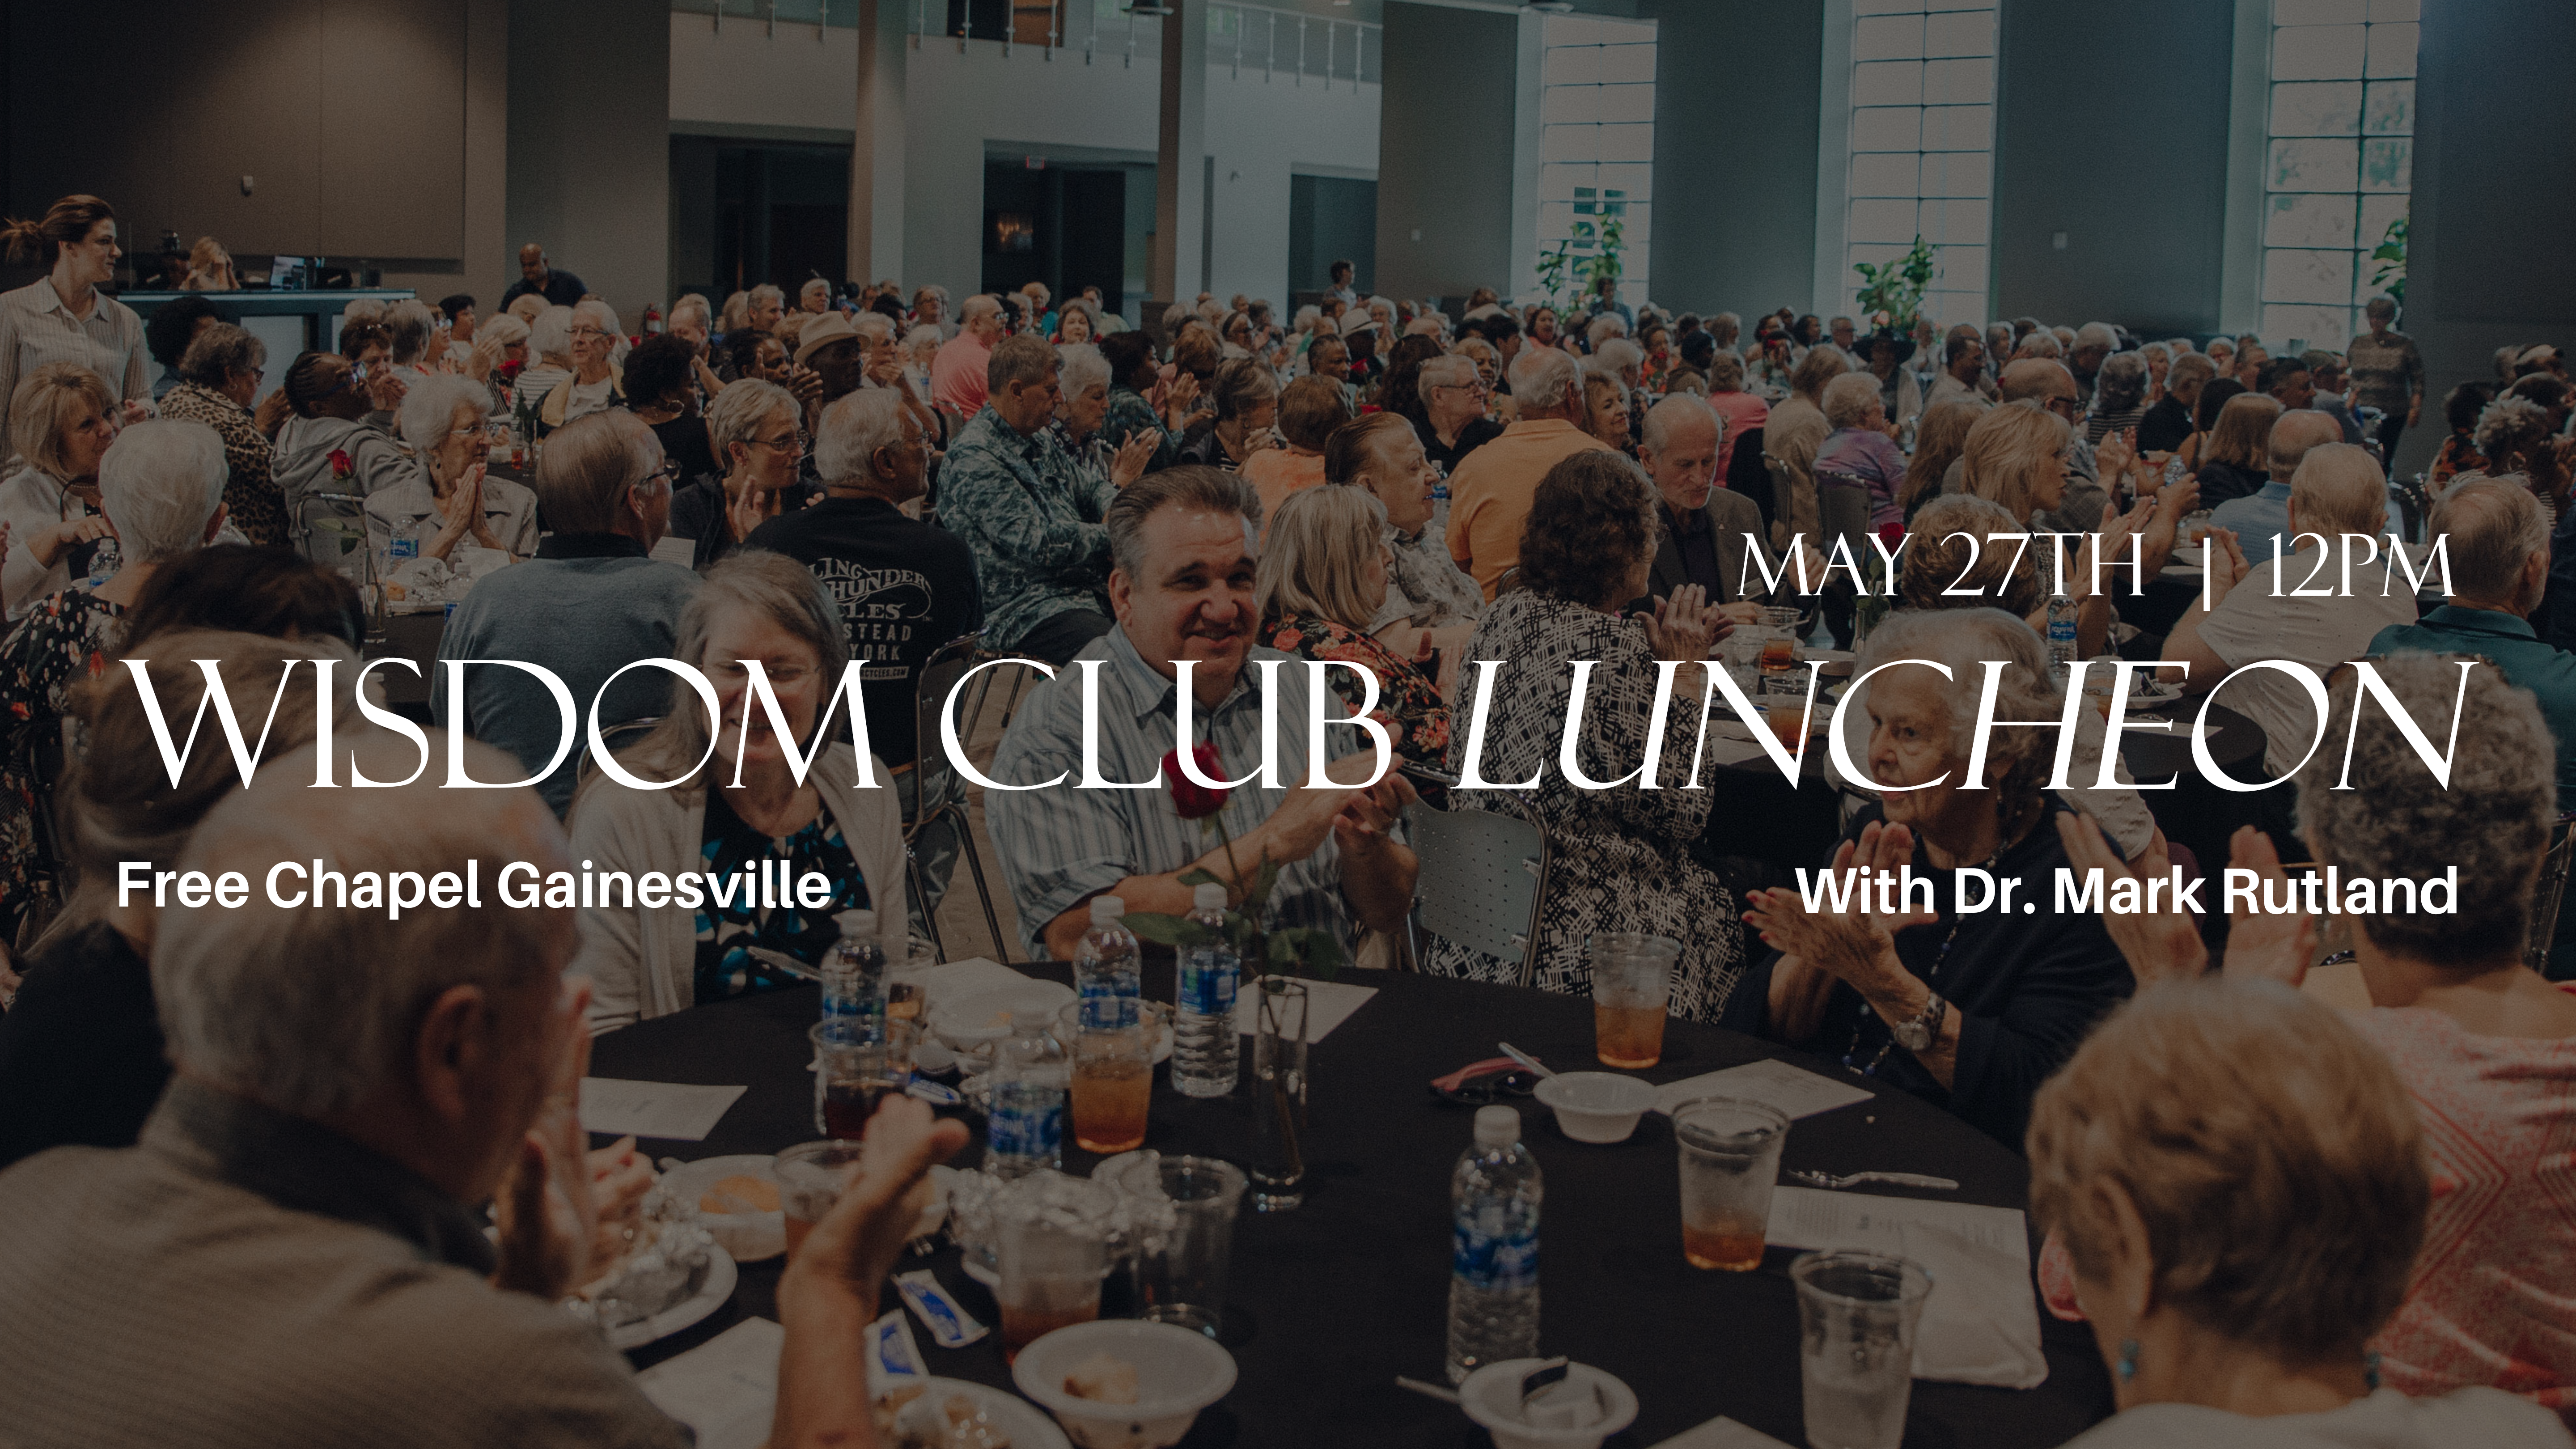 Wisdom Club Luncheon at the Gainesville campus